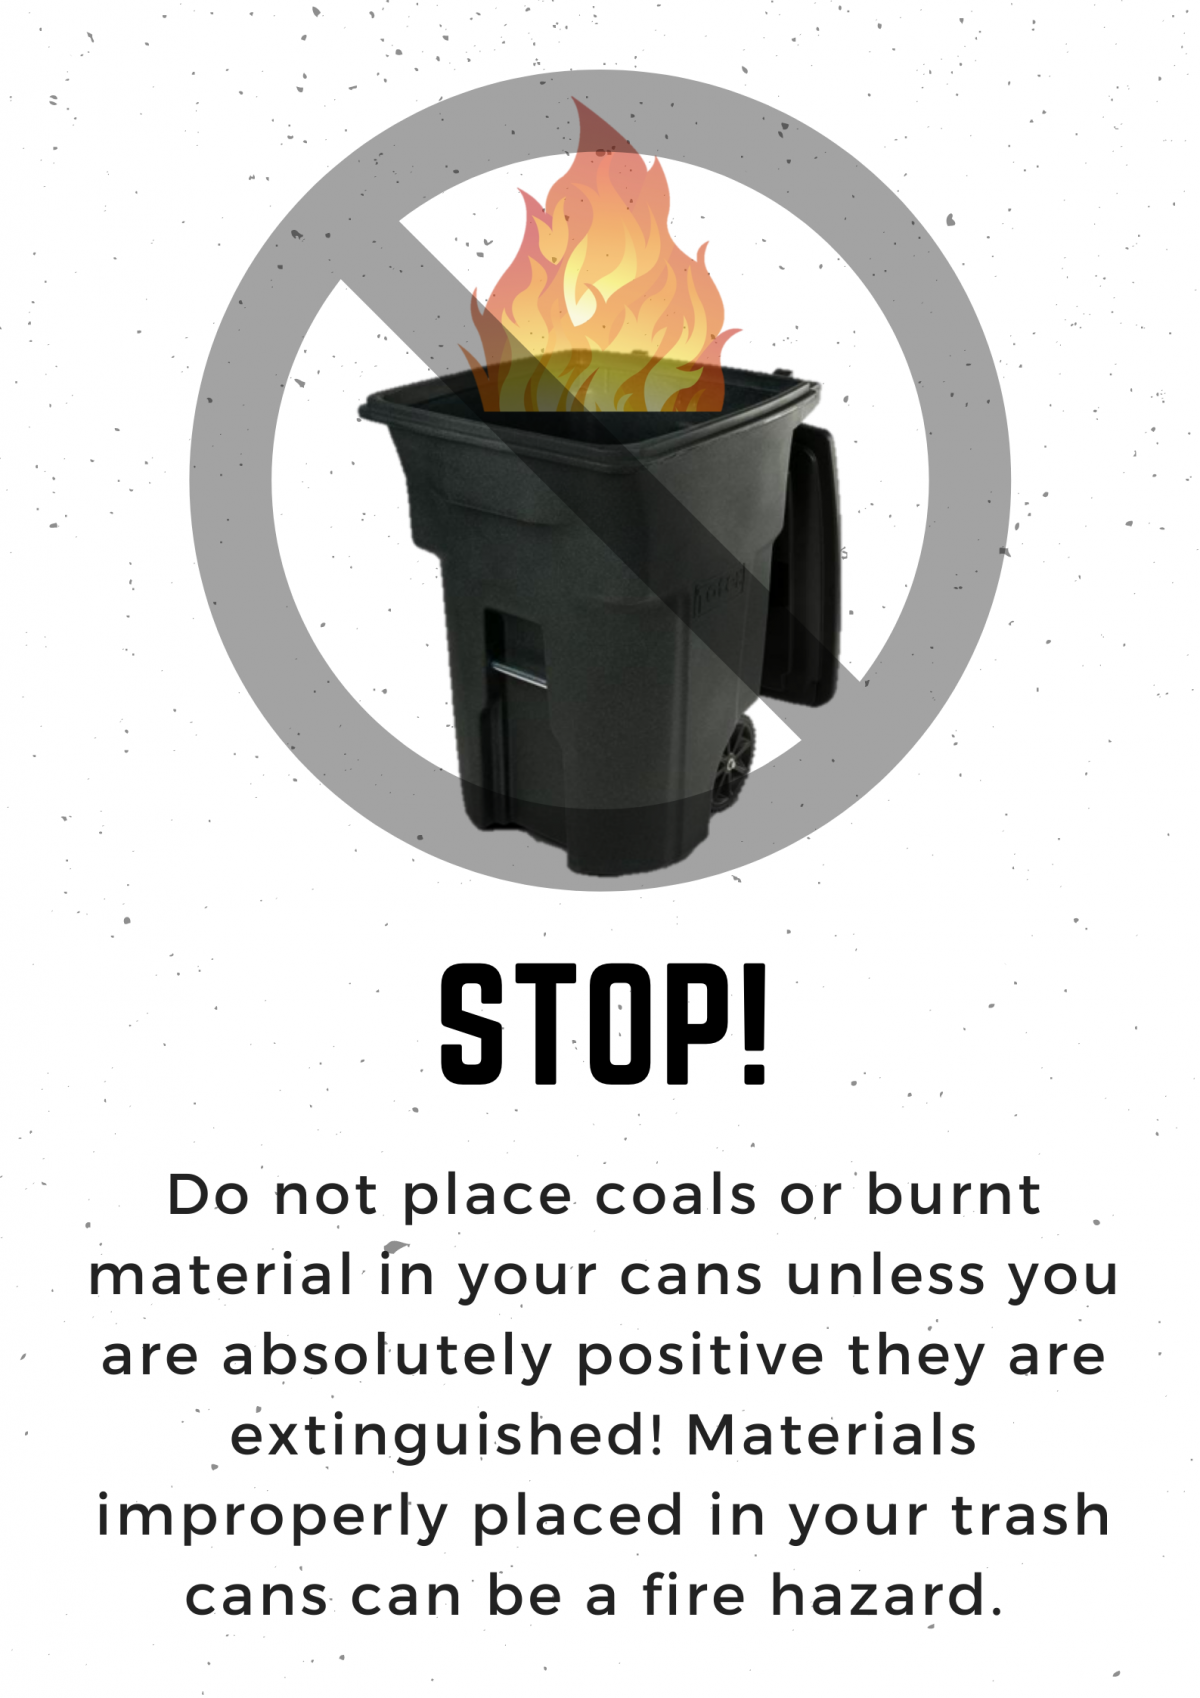 Fire Hazard: Do not place coals or burnt material in your cans unless you are absolutely positive they are extinguished! 